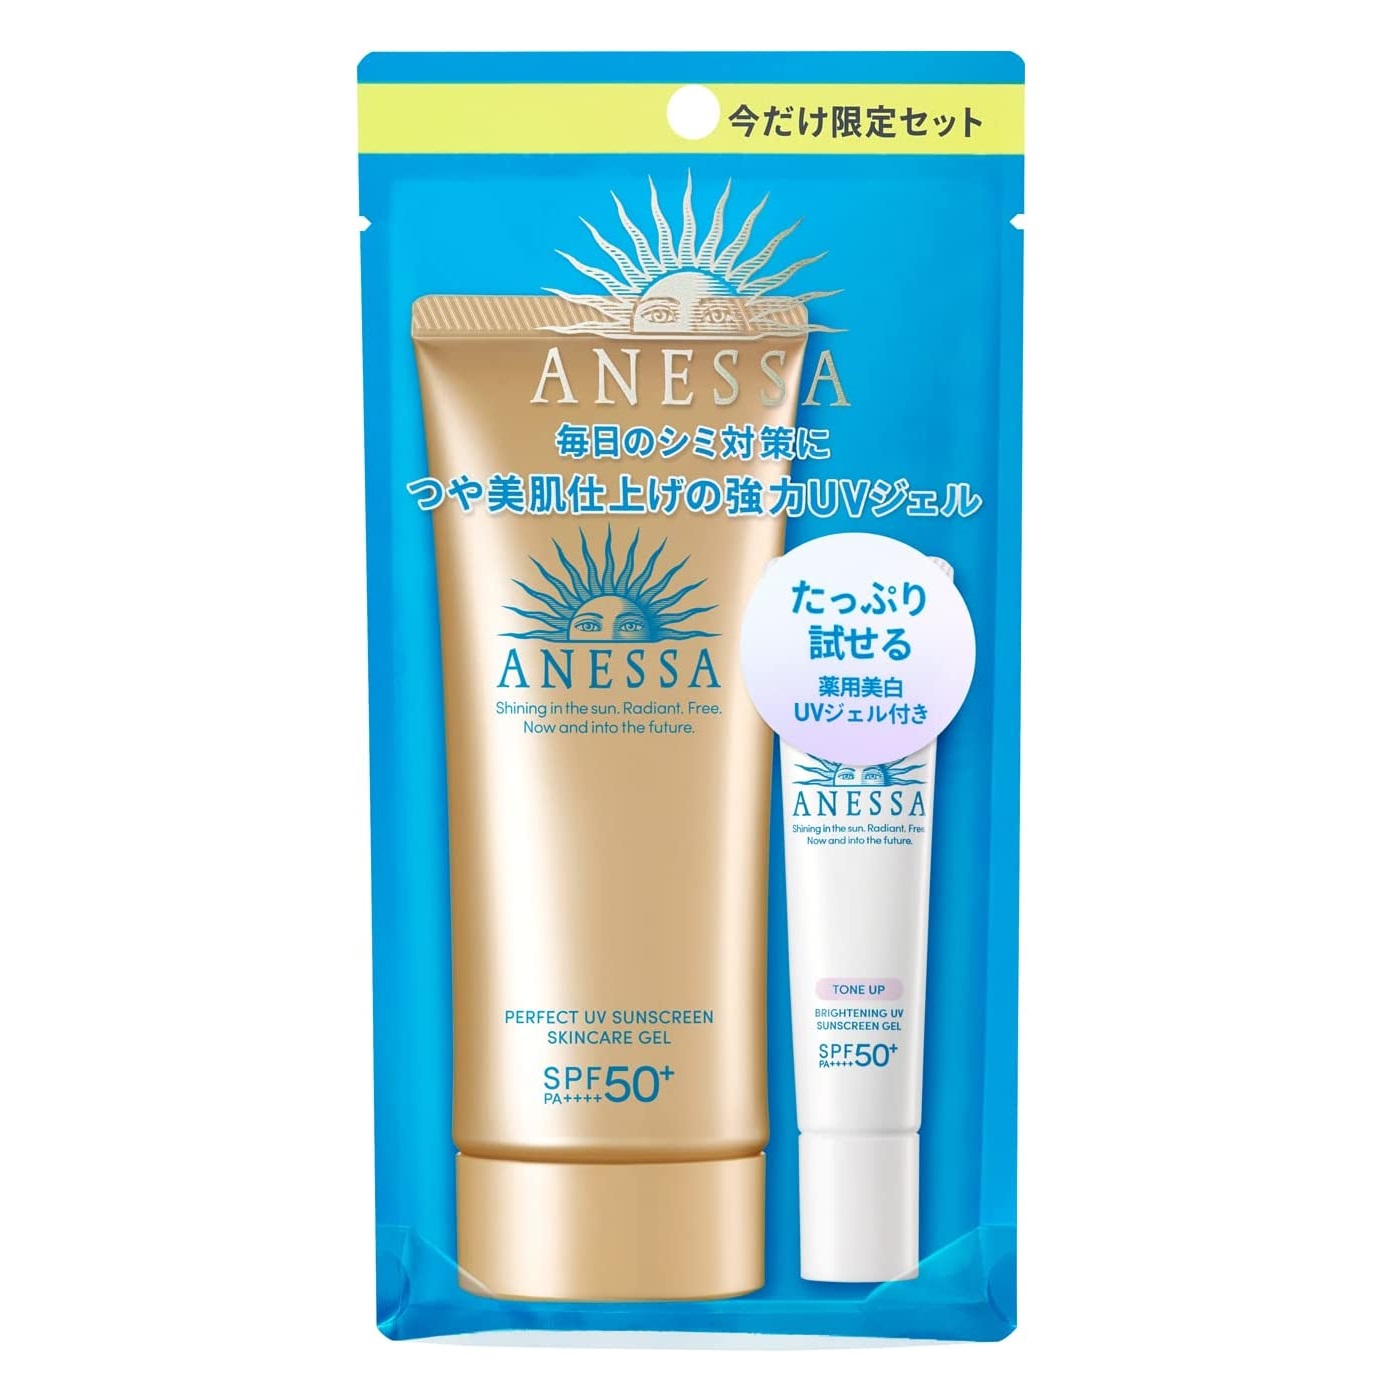 Limited set] ANESSA (ANESSa) Perfect UV skin care gel N 90g +